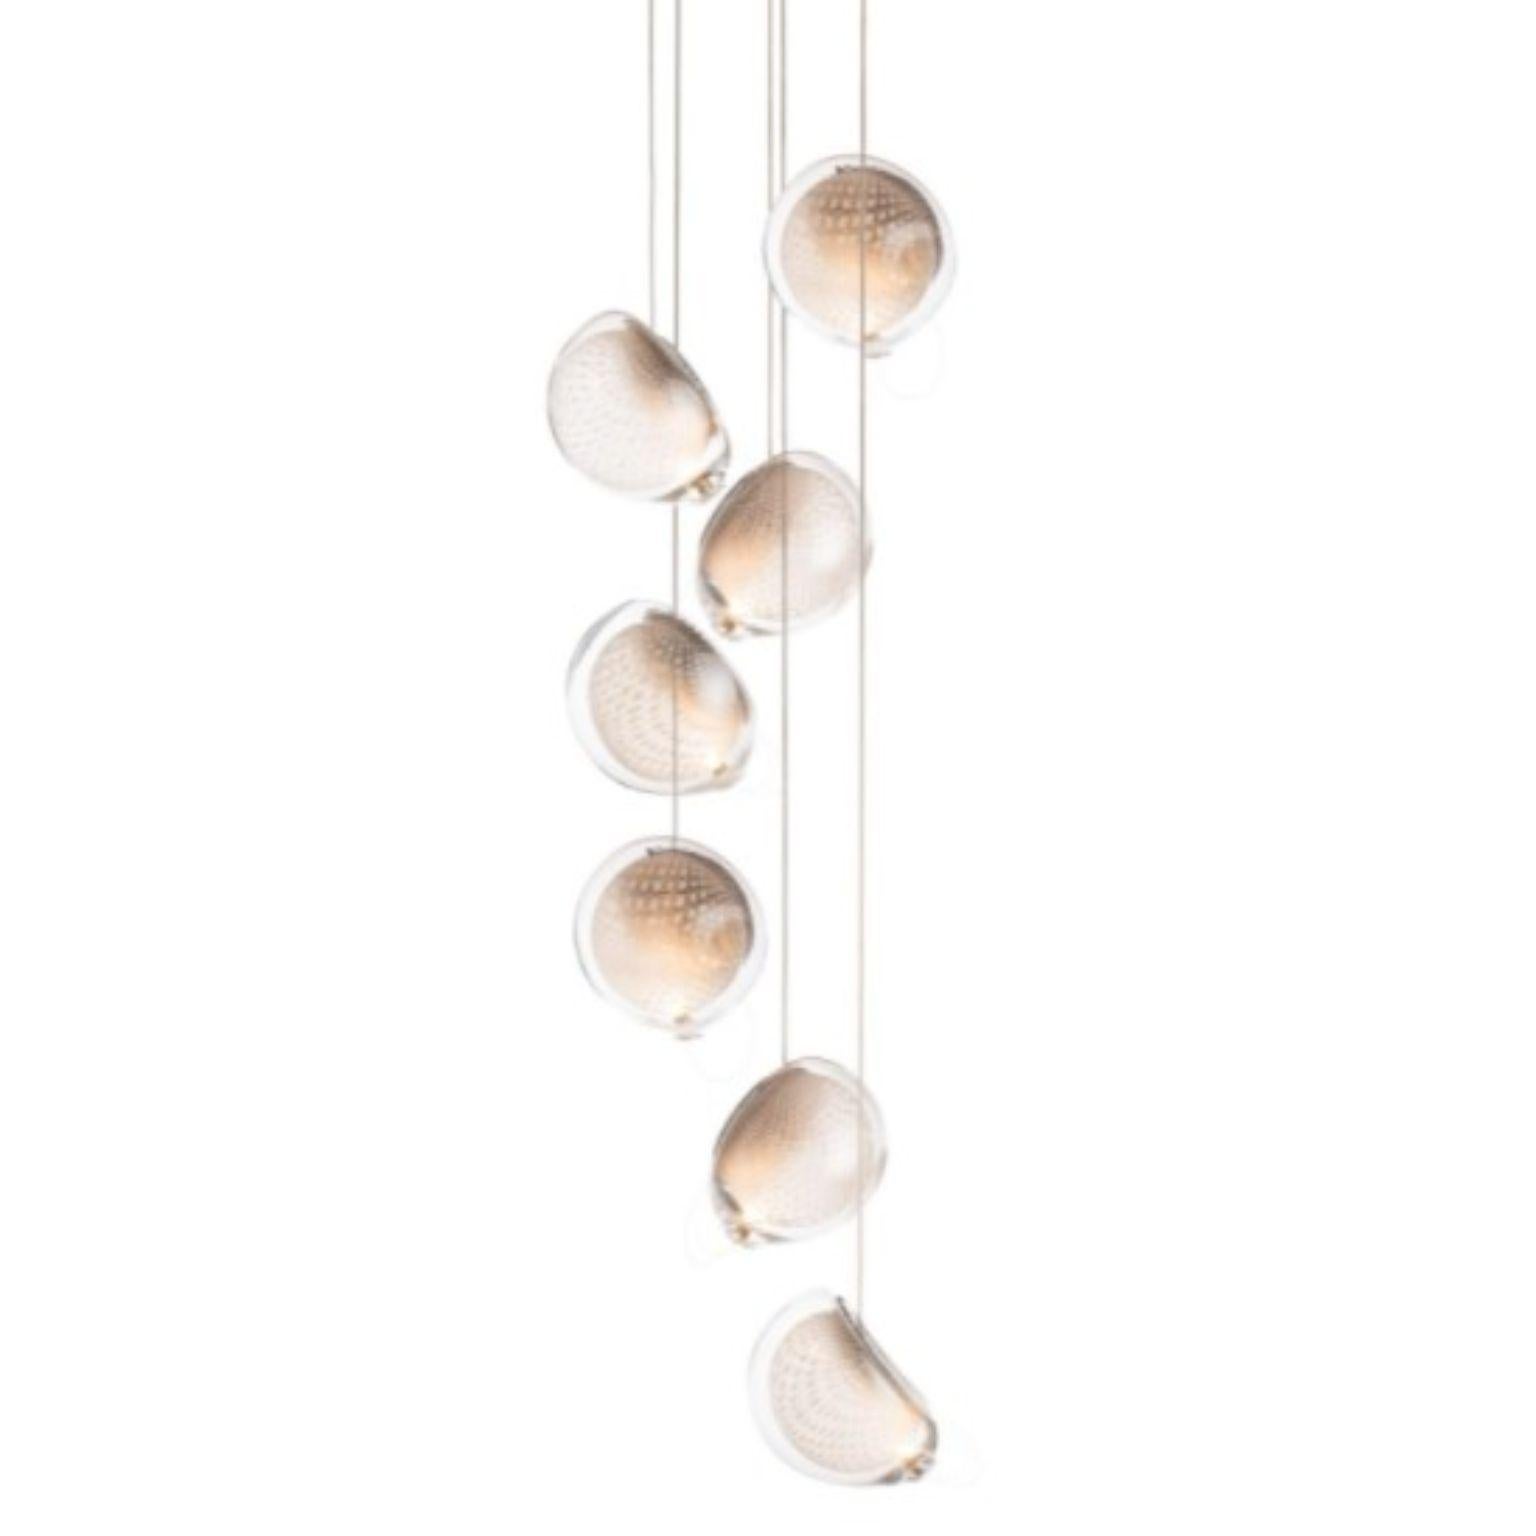 76.7 pendant by Bocci
Dimensions: D 20.3 x H 300 cm
Materials: Brushed nickel round canopy
Weight: 4.8 kg
Also available in different dimensions.

All our lamps can be wired according to each country. If sold to the USA it will be wired for